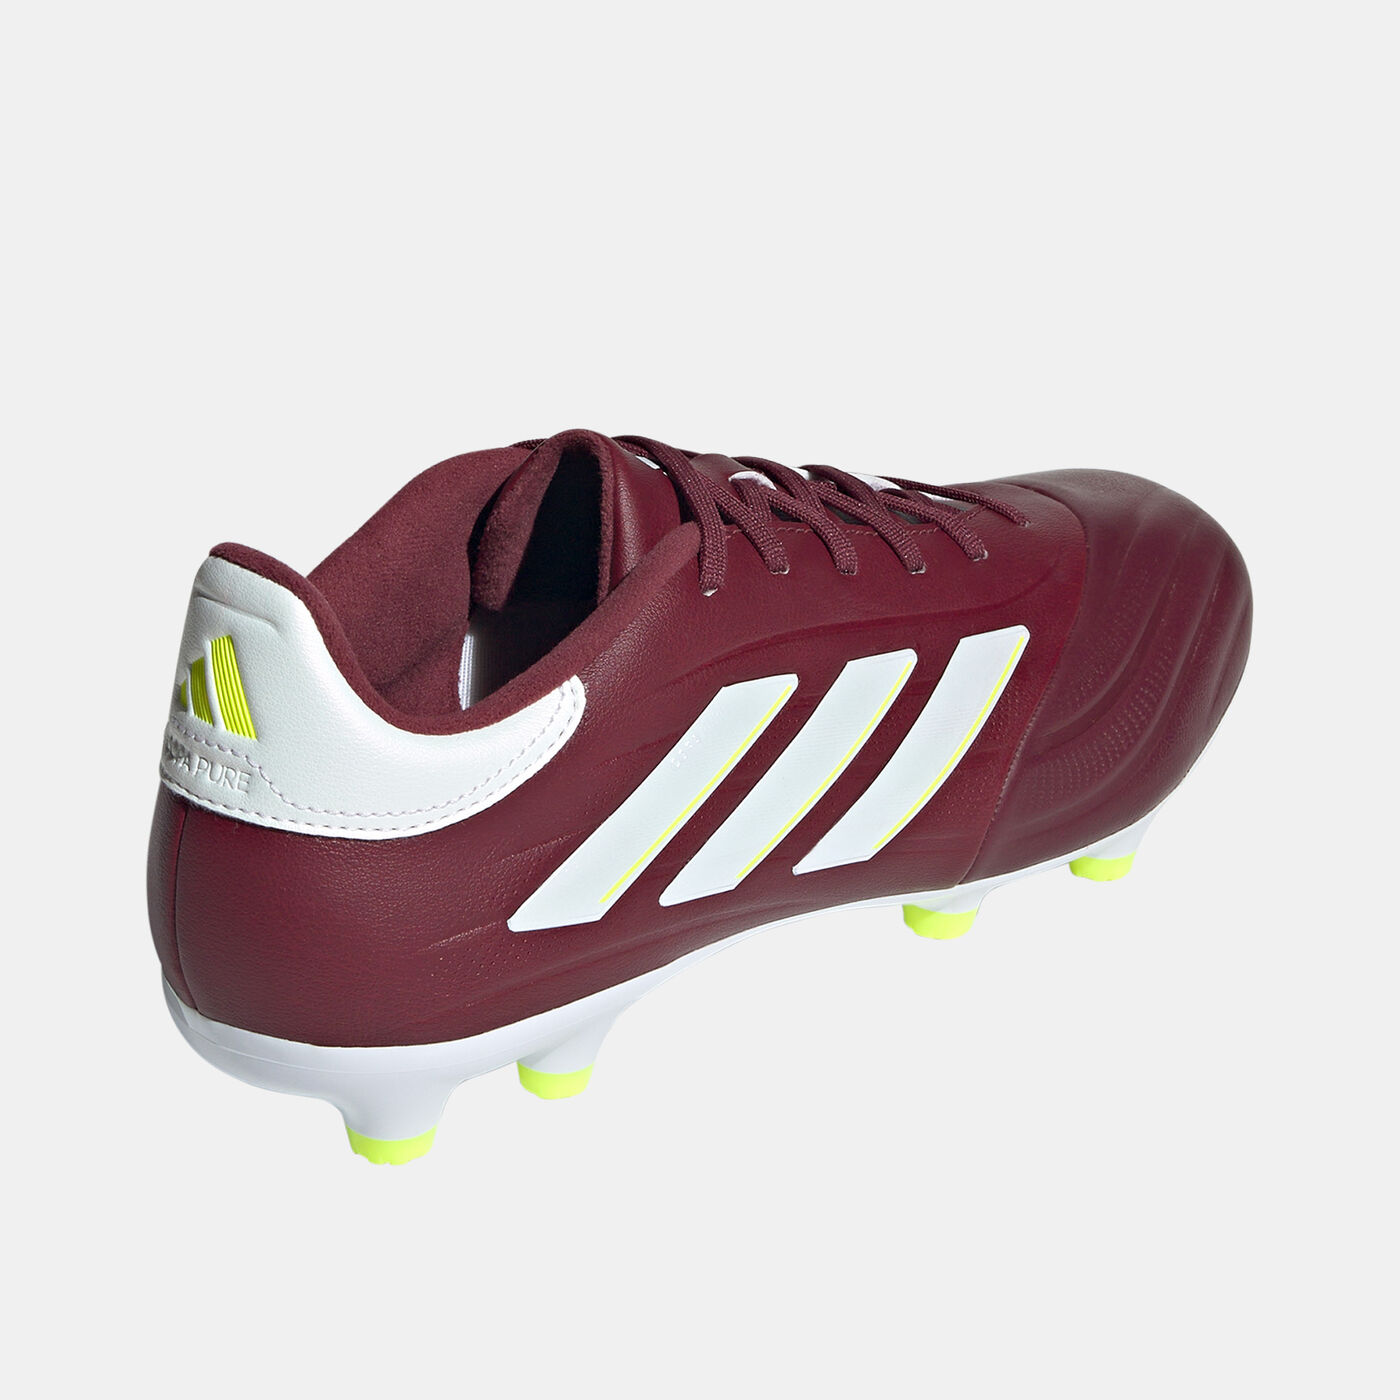 Men's Copa Pure II League Firm Ground Football Shoes